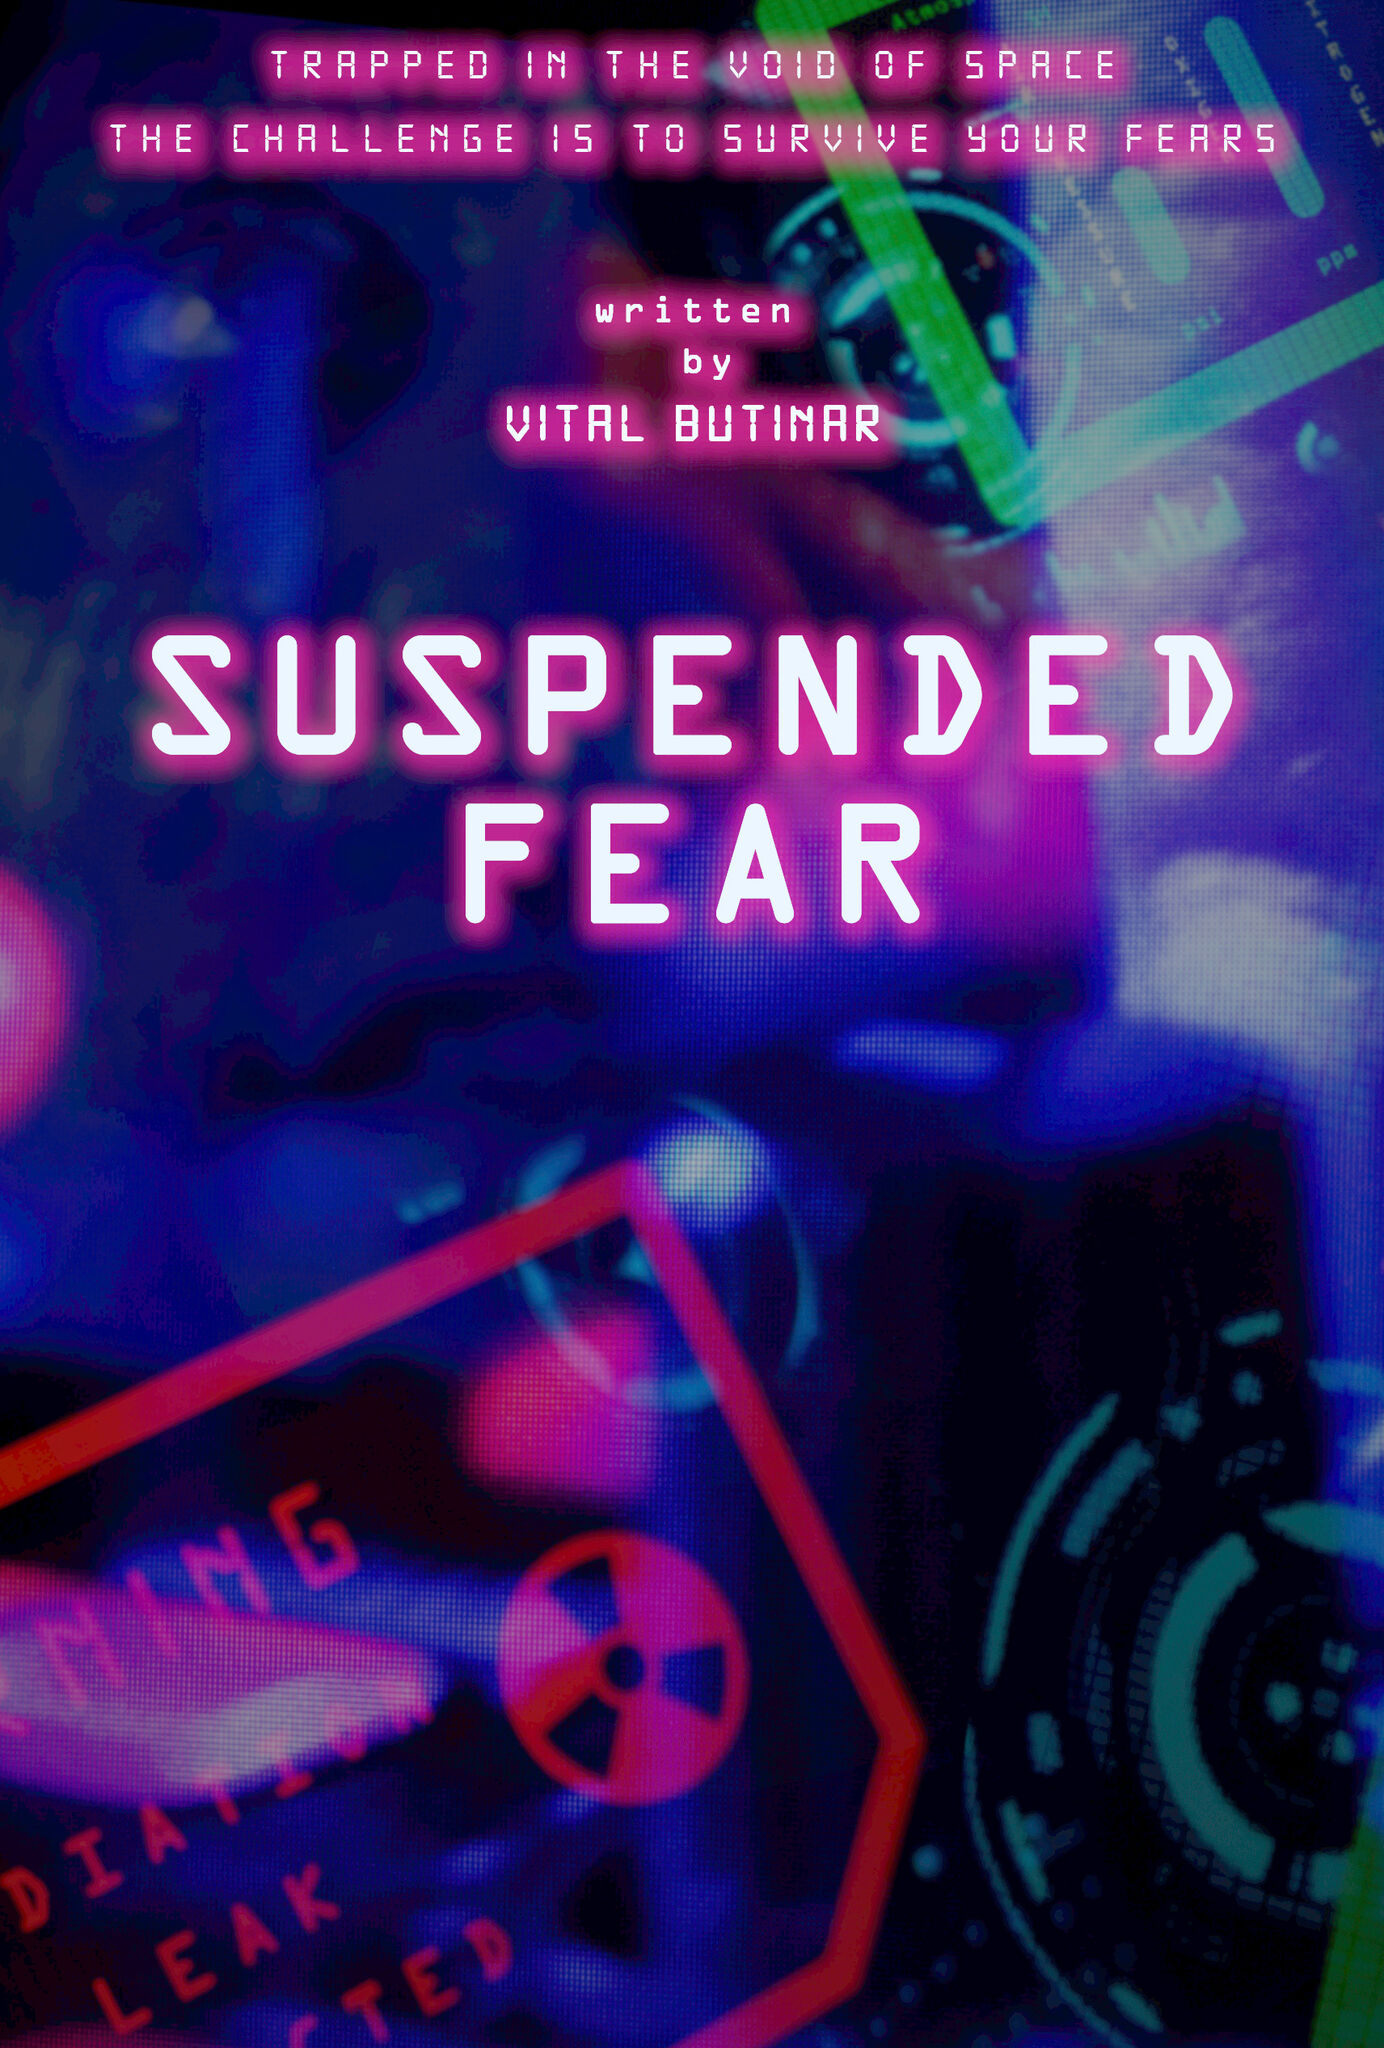 SUSPENDED FEAR